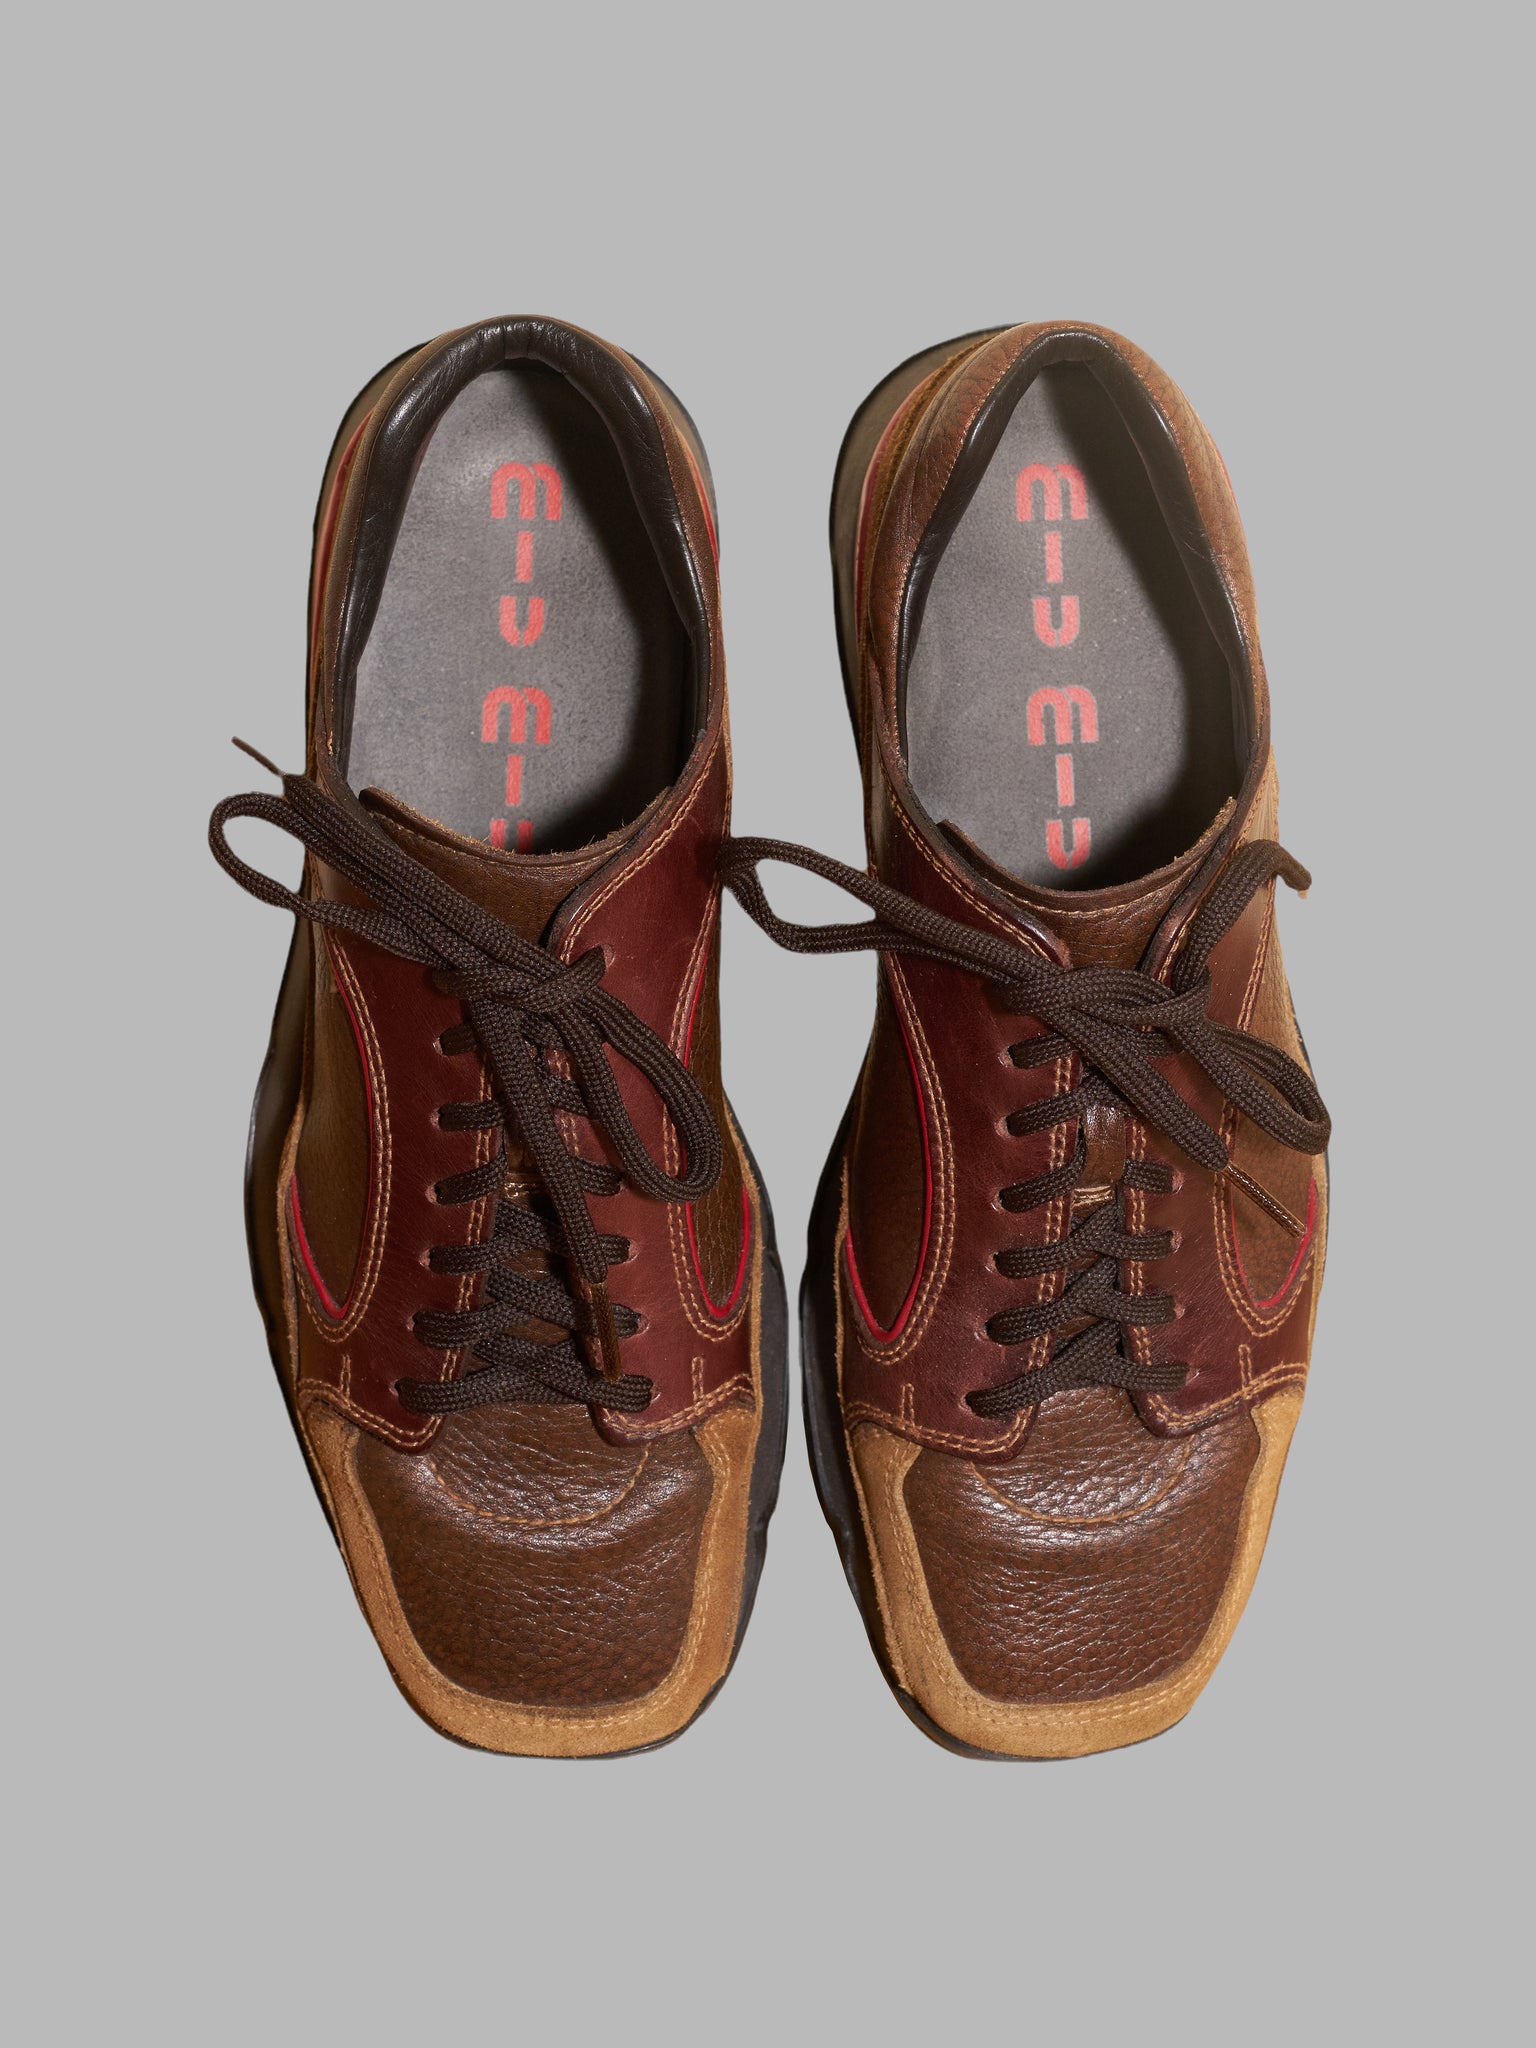 Miu Miu mens 1990s brown leather sneakers with red accents - UK 6 US 7 EU 40